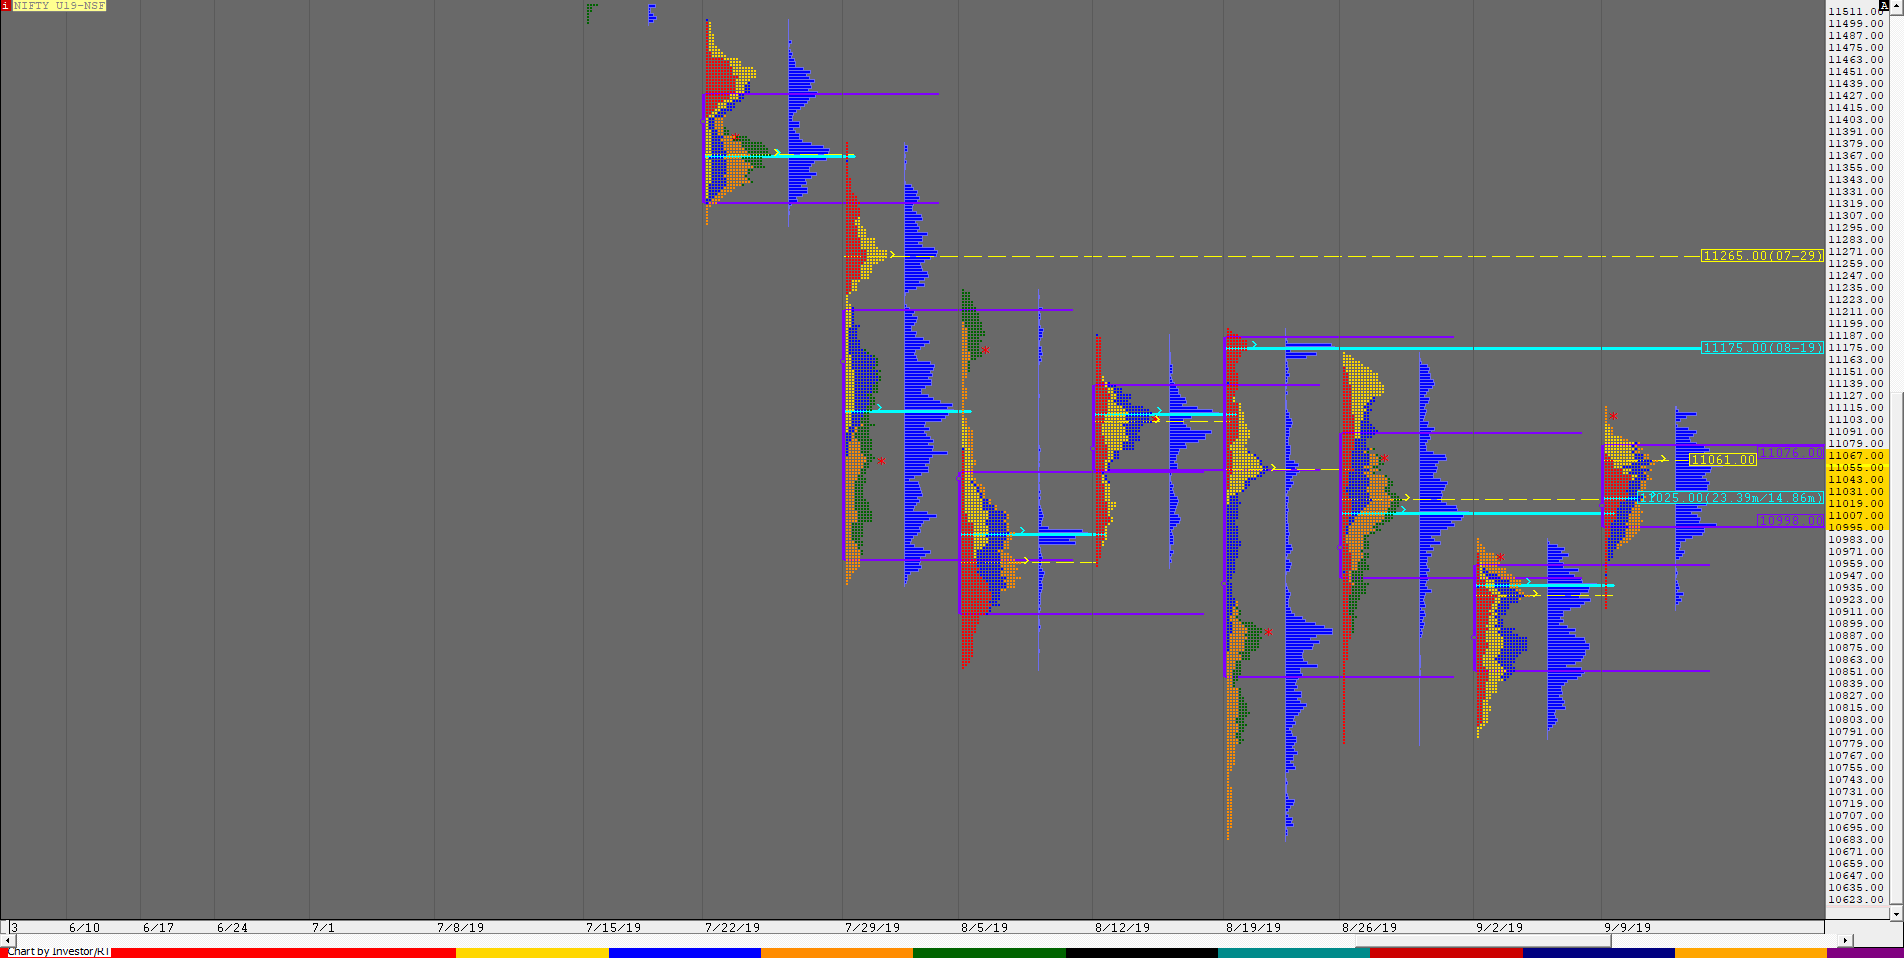 Nf F 2 Weekly Charts (9Th To 13Th September) And Market Profile Analysis Banknifty Futures, Charts, Day Trading, Intraday Trading, Intraday Trading Strategies, Market Profile, Market Profile Trading Strategies, Nifty Futures, Order Flow Analysis, Support And Resistance, Technical Analysis, Trading Strategies, Volume Profile Trading